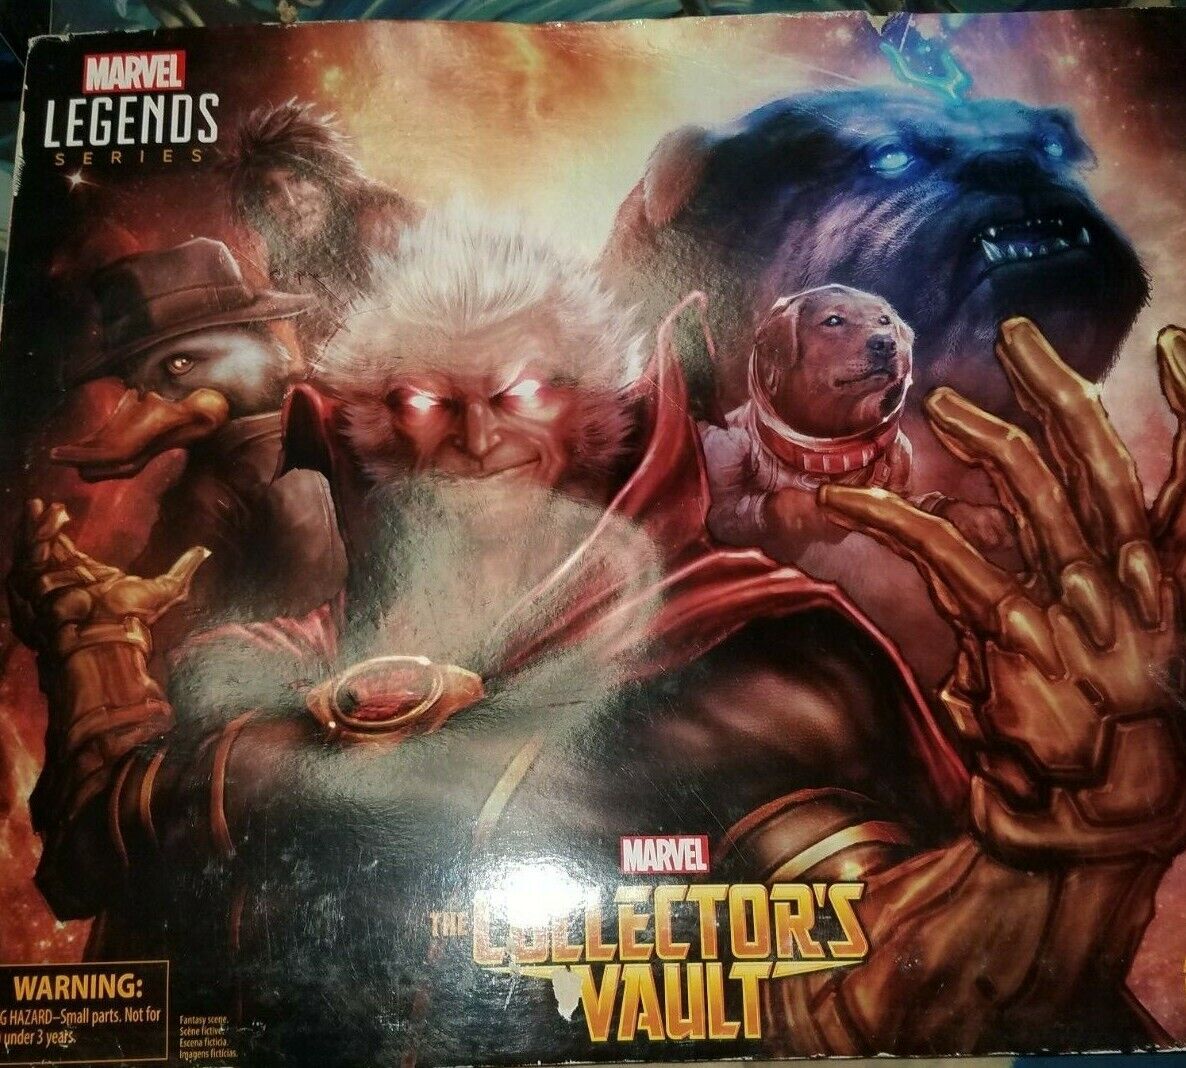 SDCC 2016 Hasbro's Marvel Legends Series The Collector's Vault Limited Exclusiv!